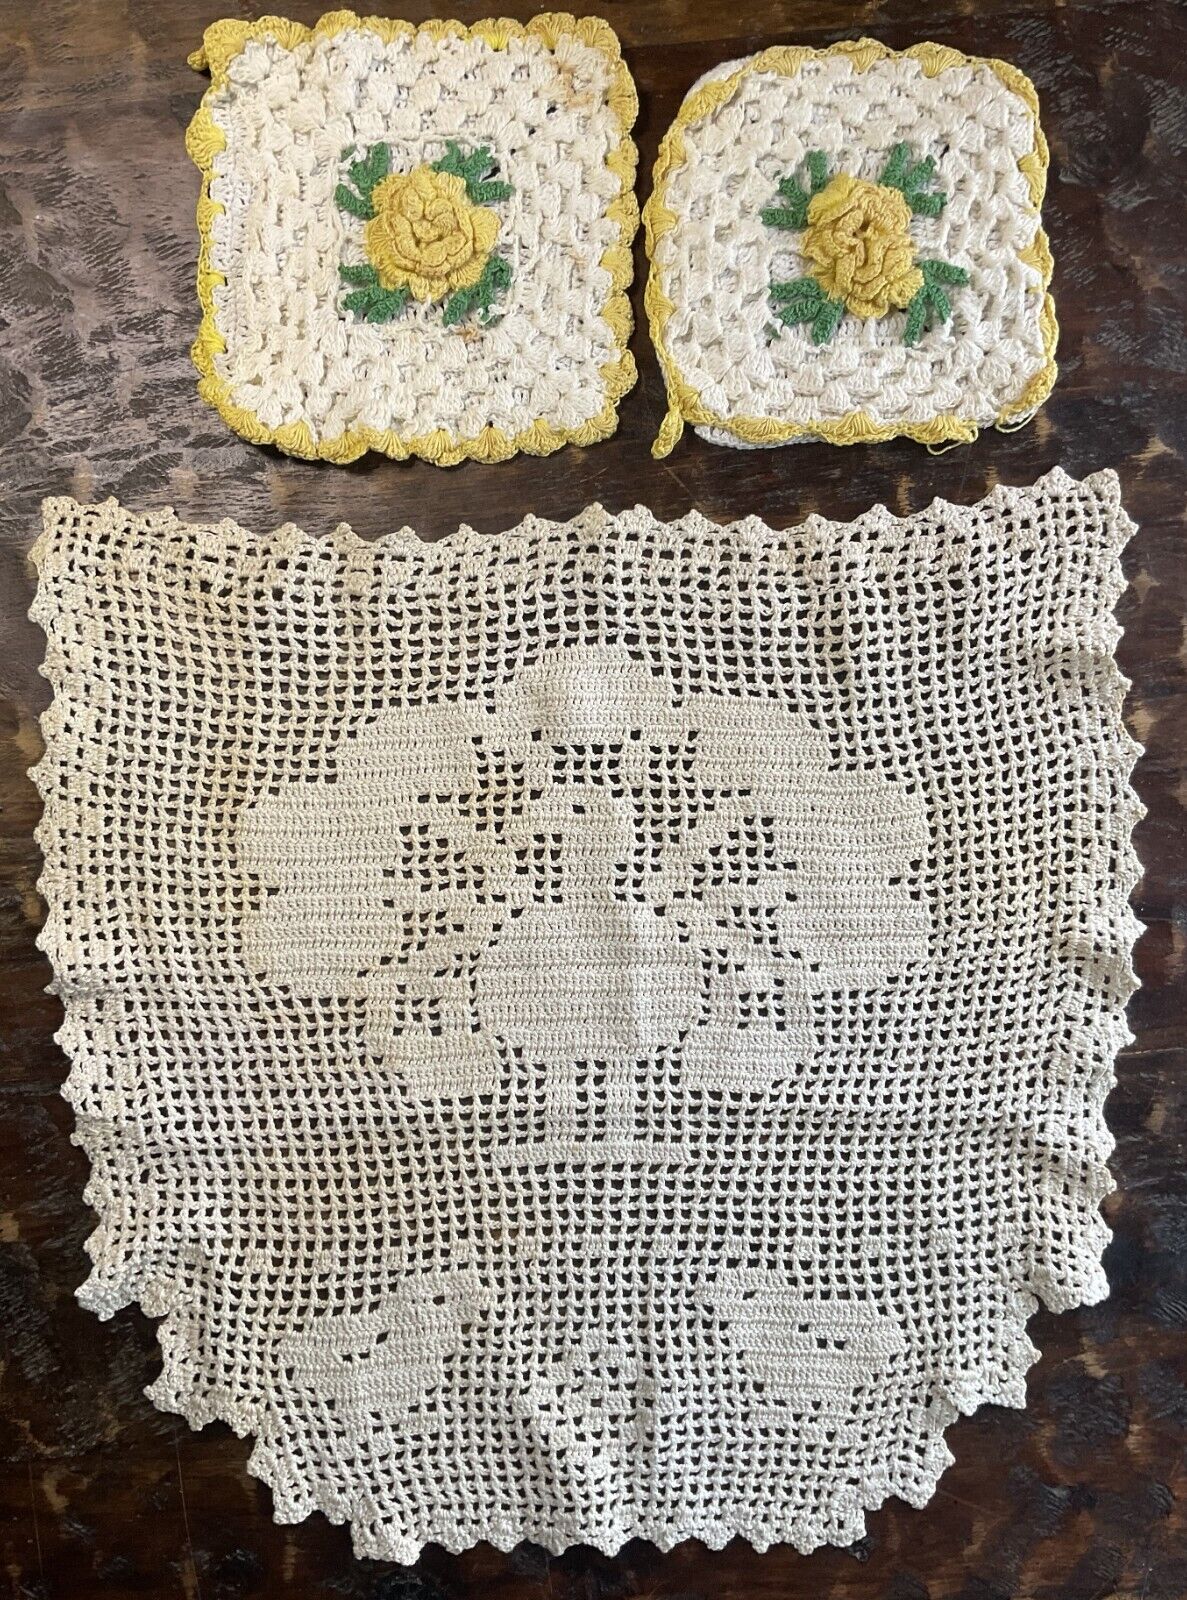 Vintage French Country Crochet Turkey & Chicks Doily & Yellow Rose Potholders